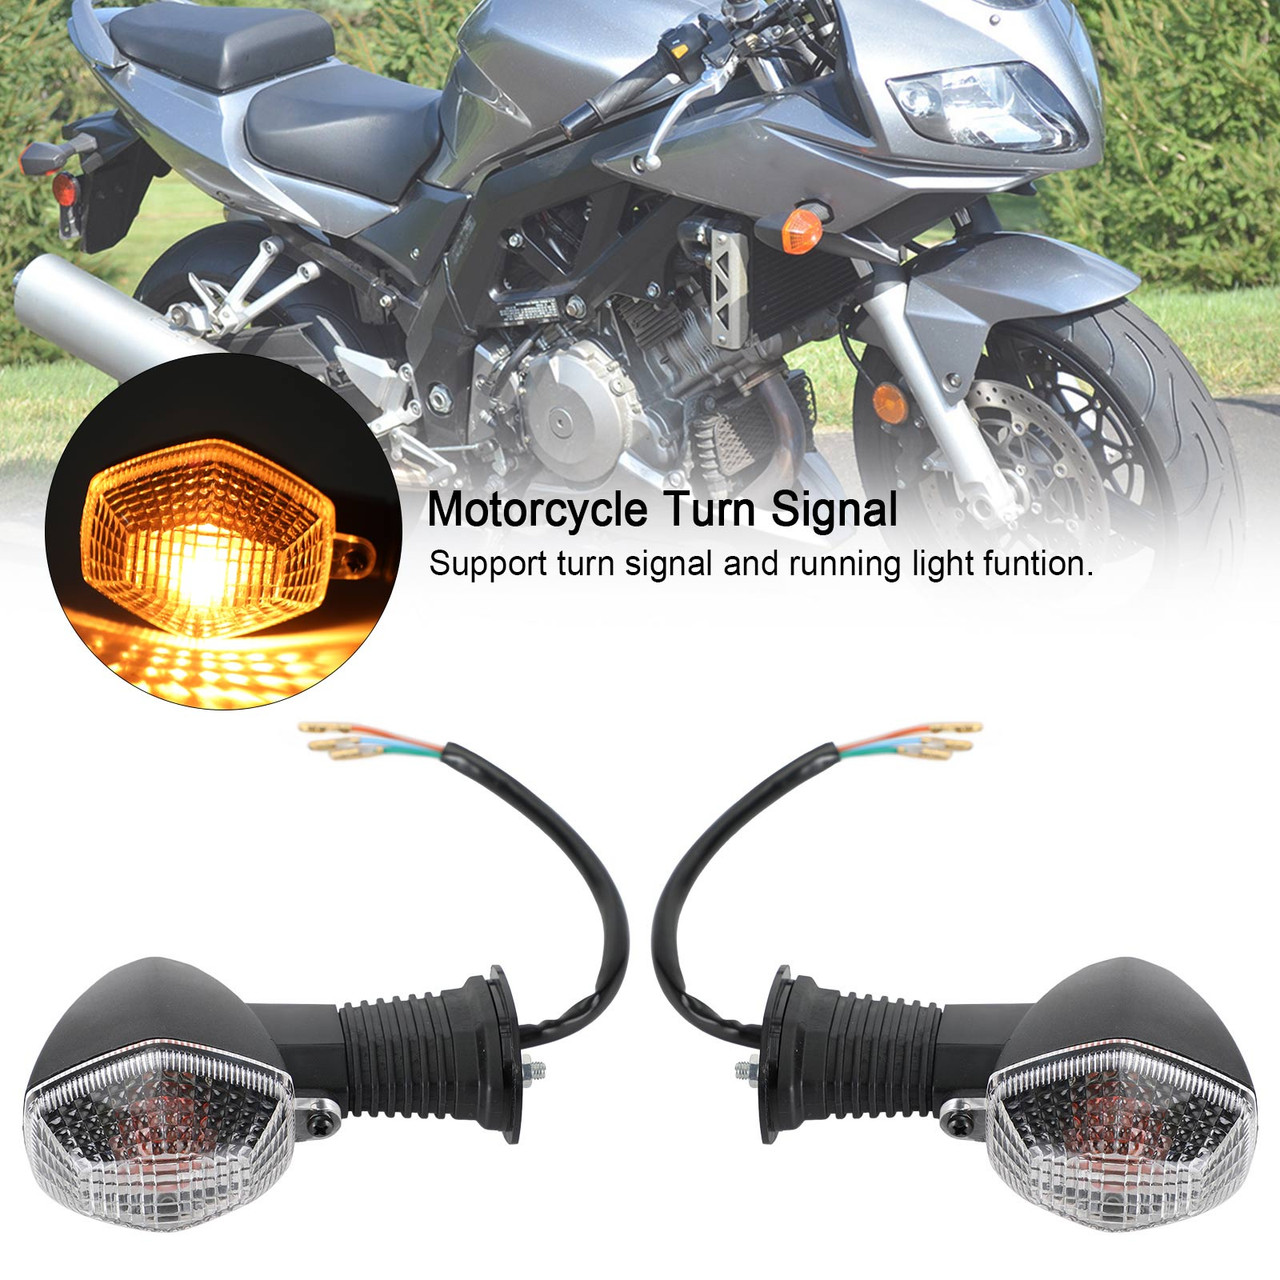 Motorcycle Turn Signal Fit for Suzuki GSF 600N/S for Bandit 2000-2003 SV 650N 2003-2009 DL 1000 for V-Strom 2006-2013 Clear